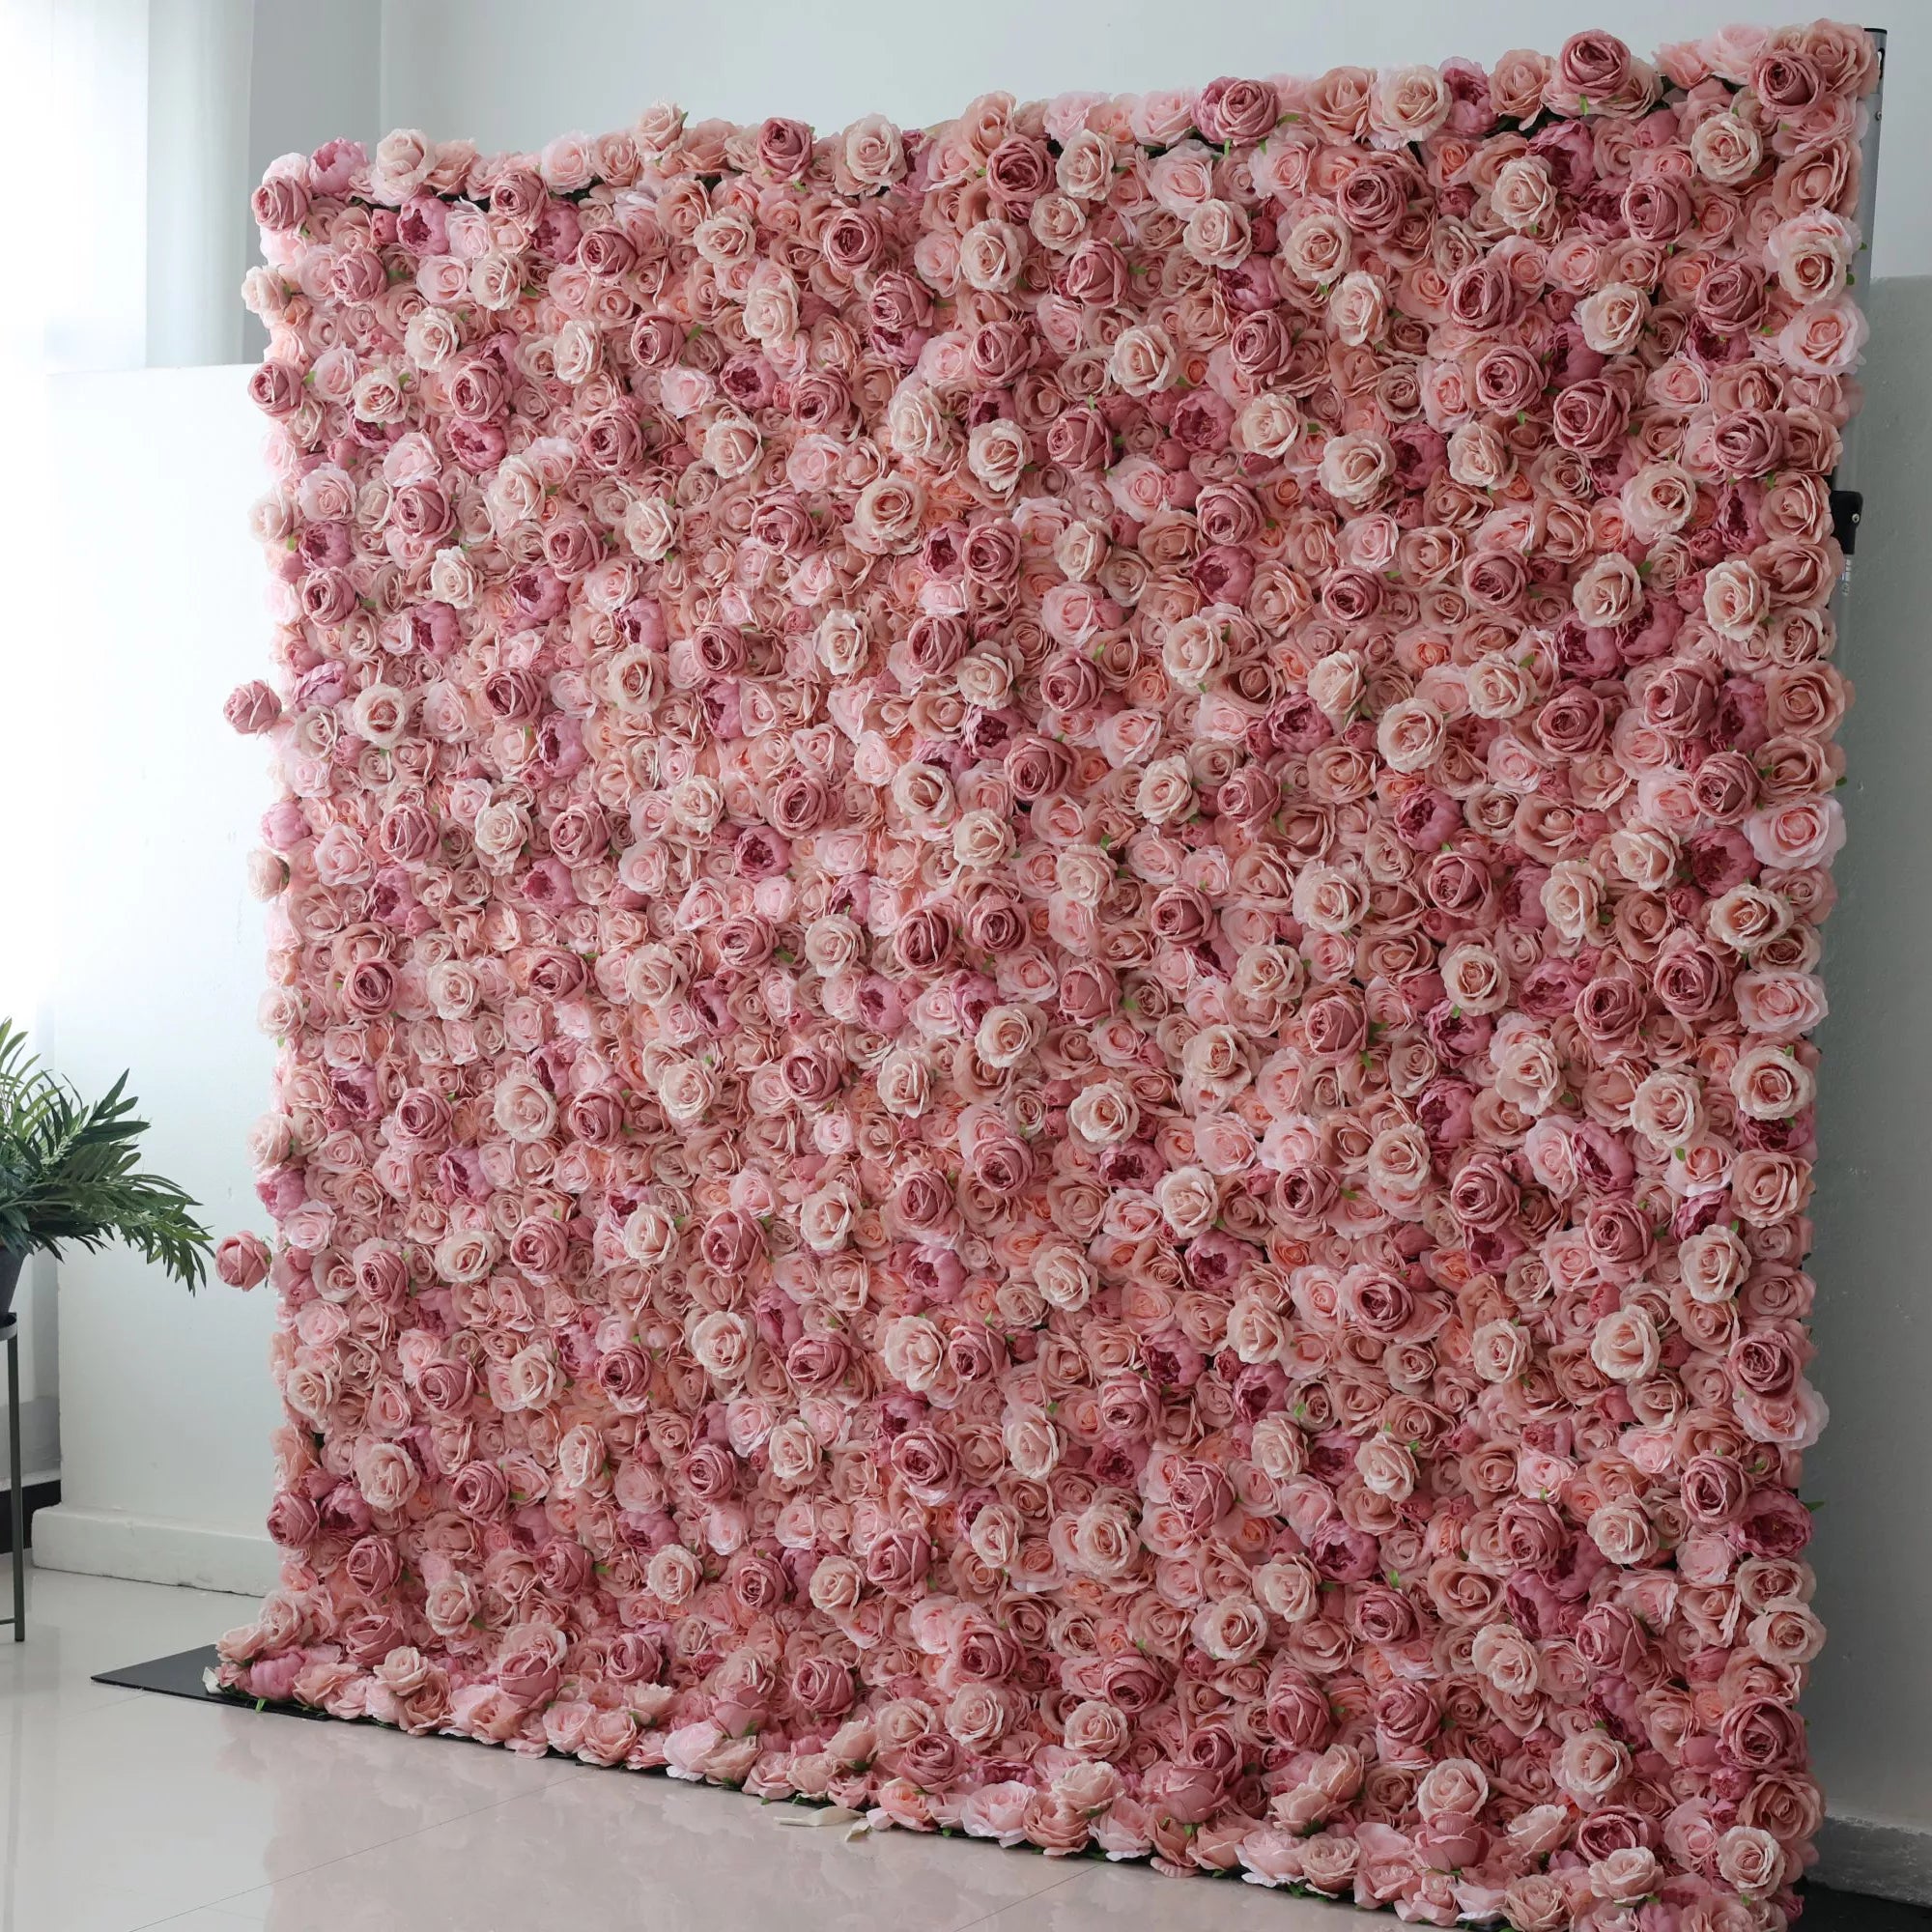 Valar Flowers' Rosé Reverie: Experience the elegance with a fusion of dusky pink and cream fabric roses, elevating events and interiors with its graceful charm.